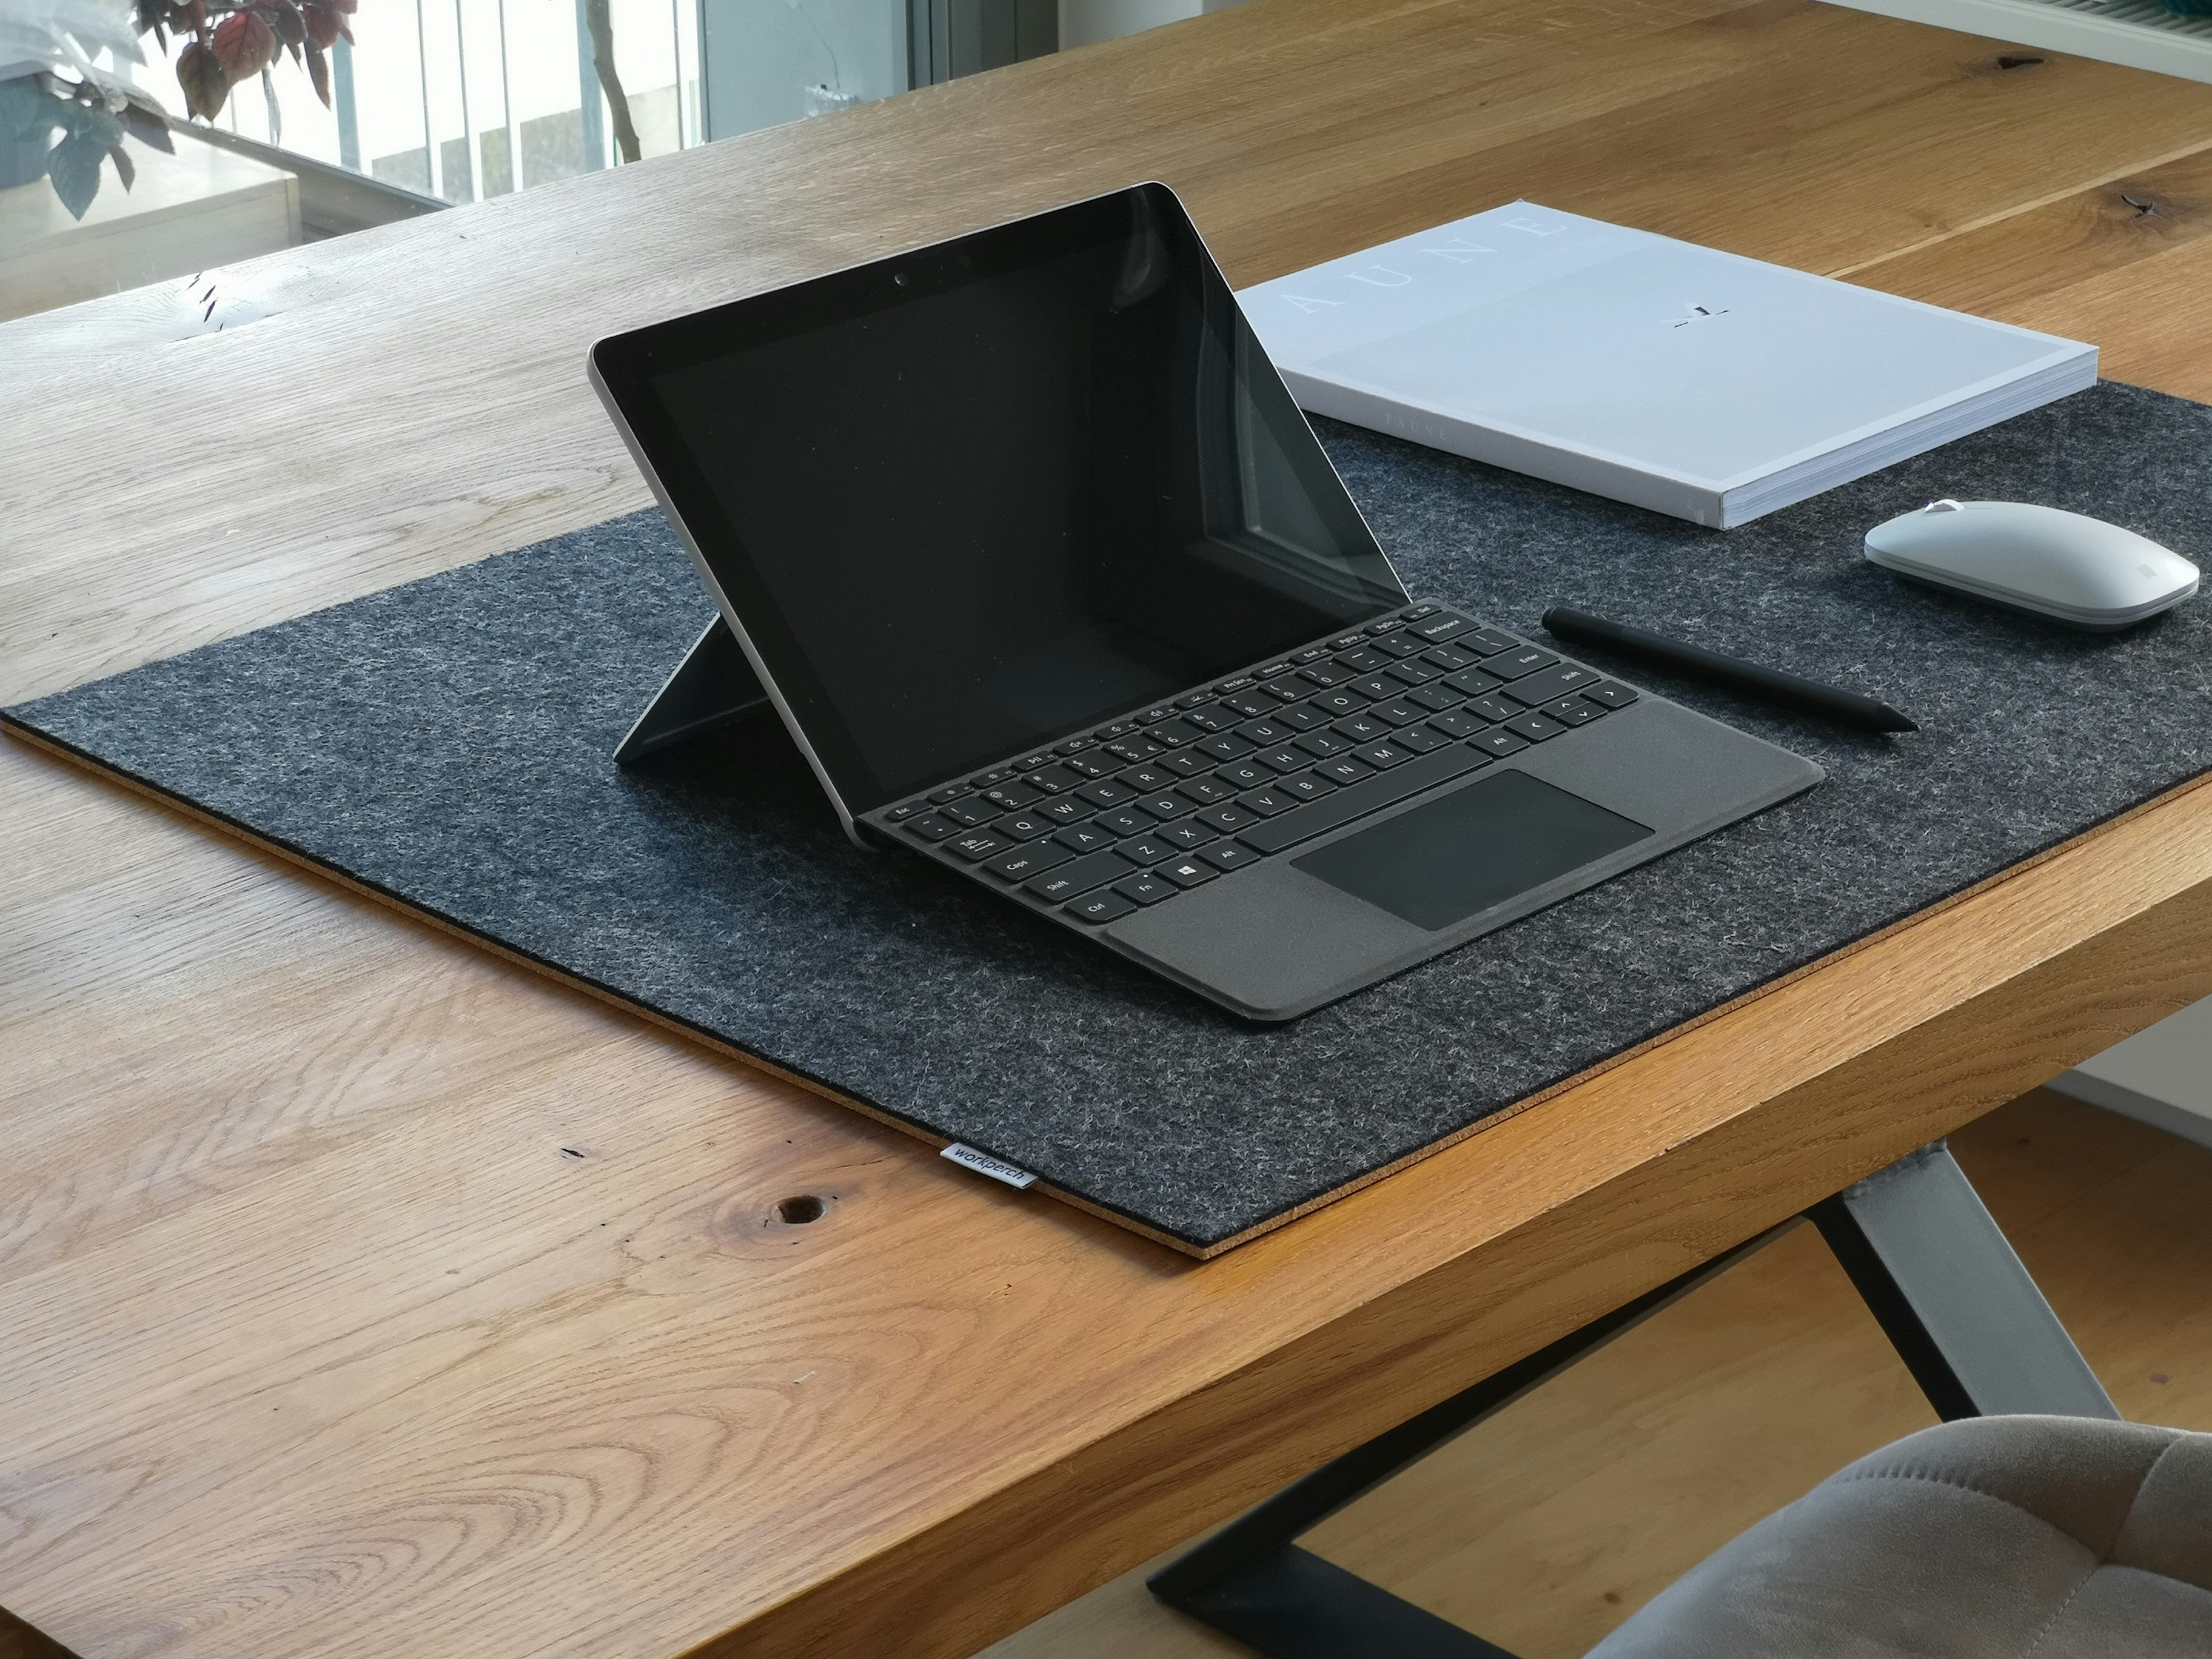 black and silver laptop computer on brown wooden table